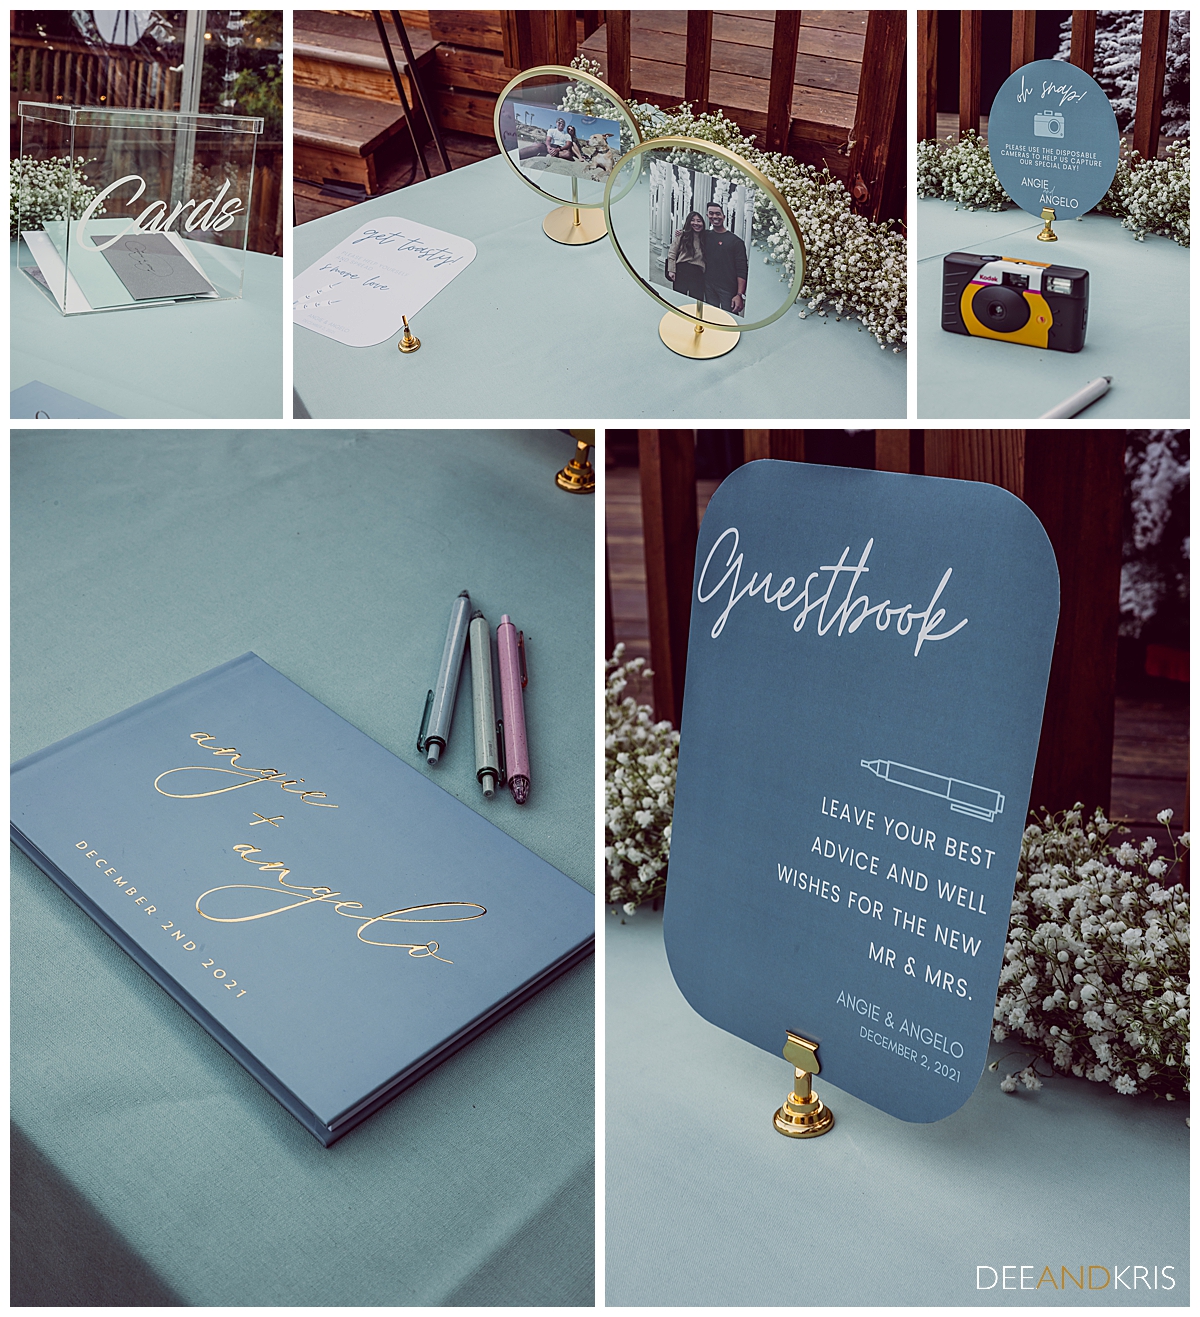 Five images of guest sign-in book and selfie station.